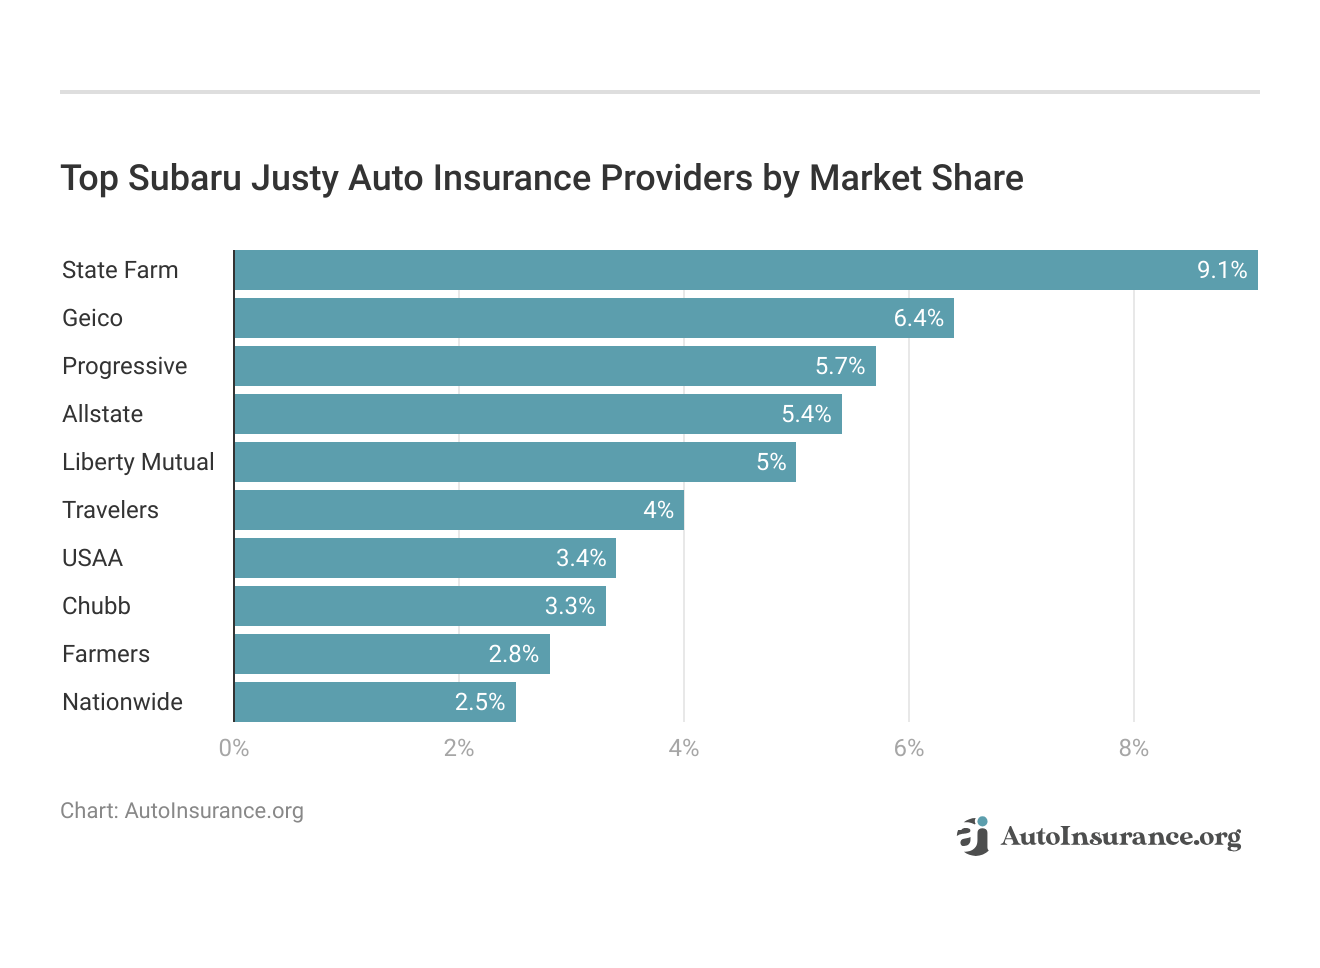 <h3>Top Subaru Justy Auto Insurance Providers by Market Share</h3>